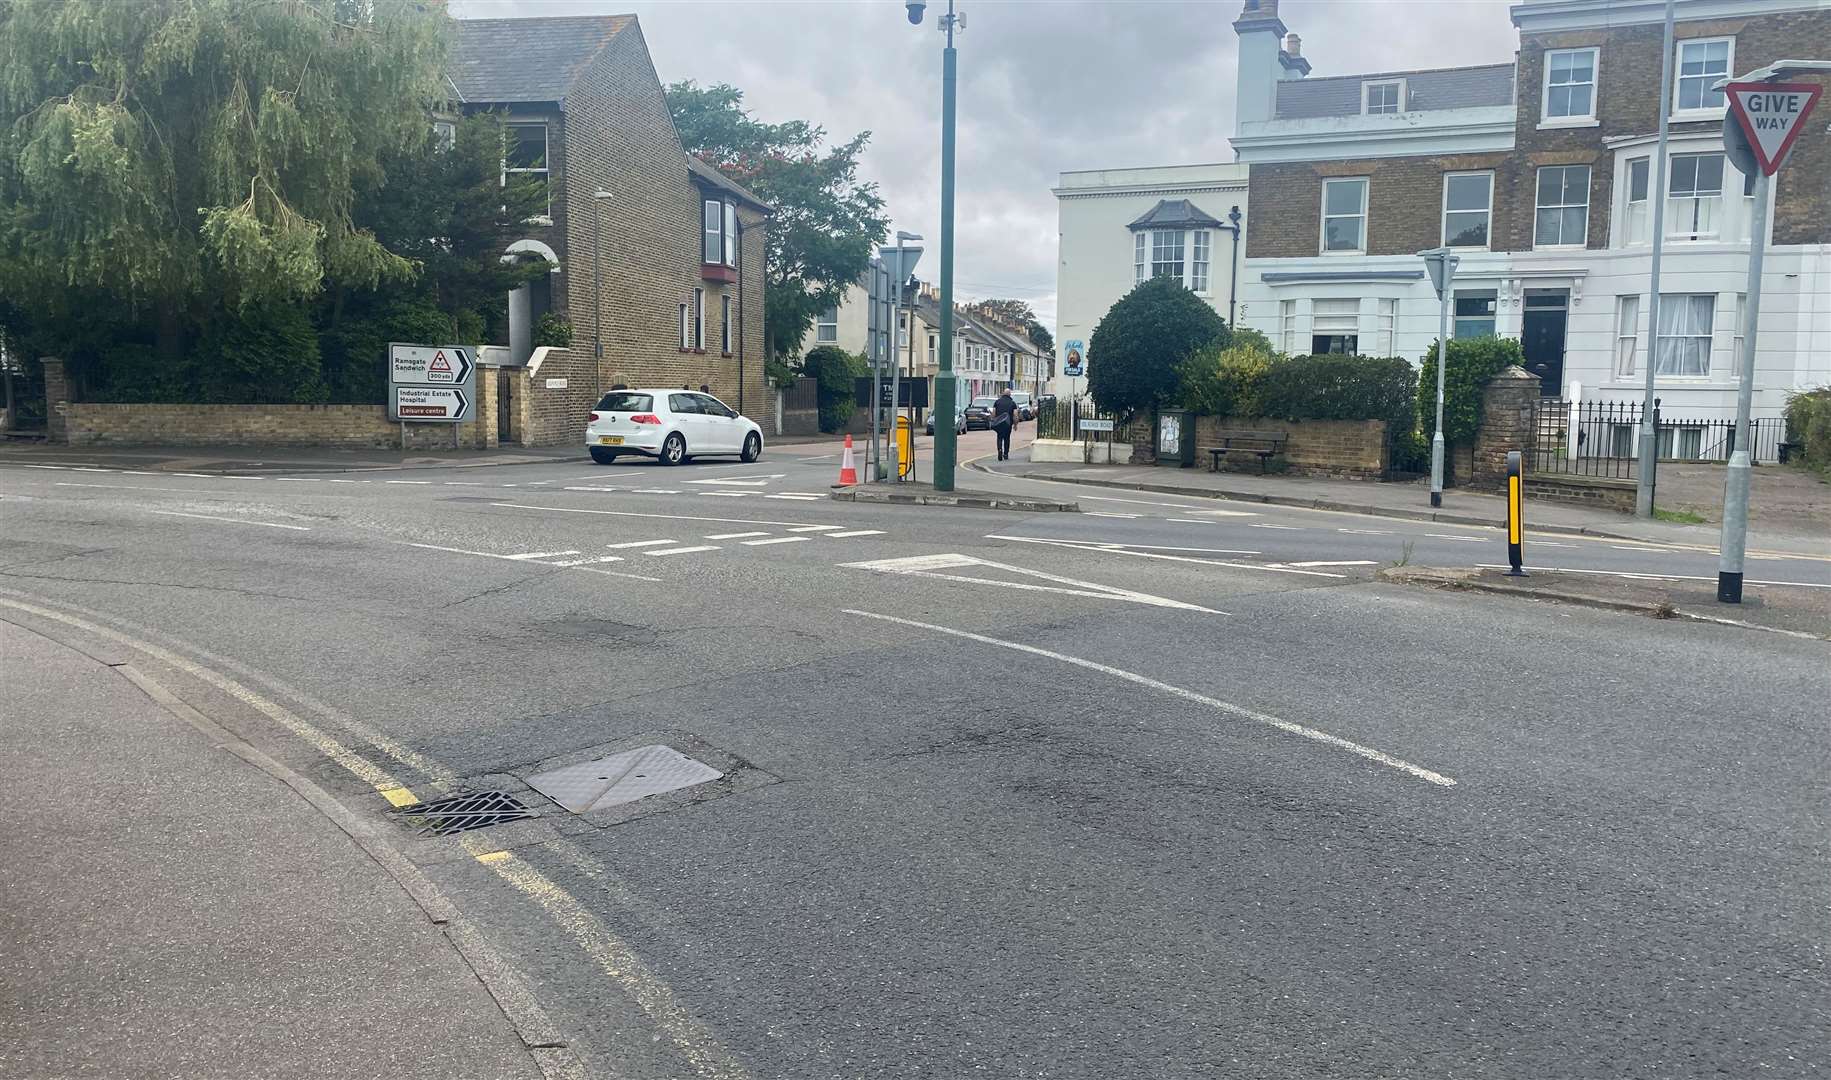 The junction with Victoria Road, Deal Castle Road and Gilford Road has been called the “dodgiest” in Deal